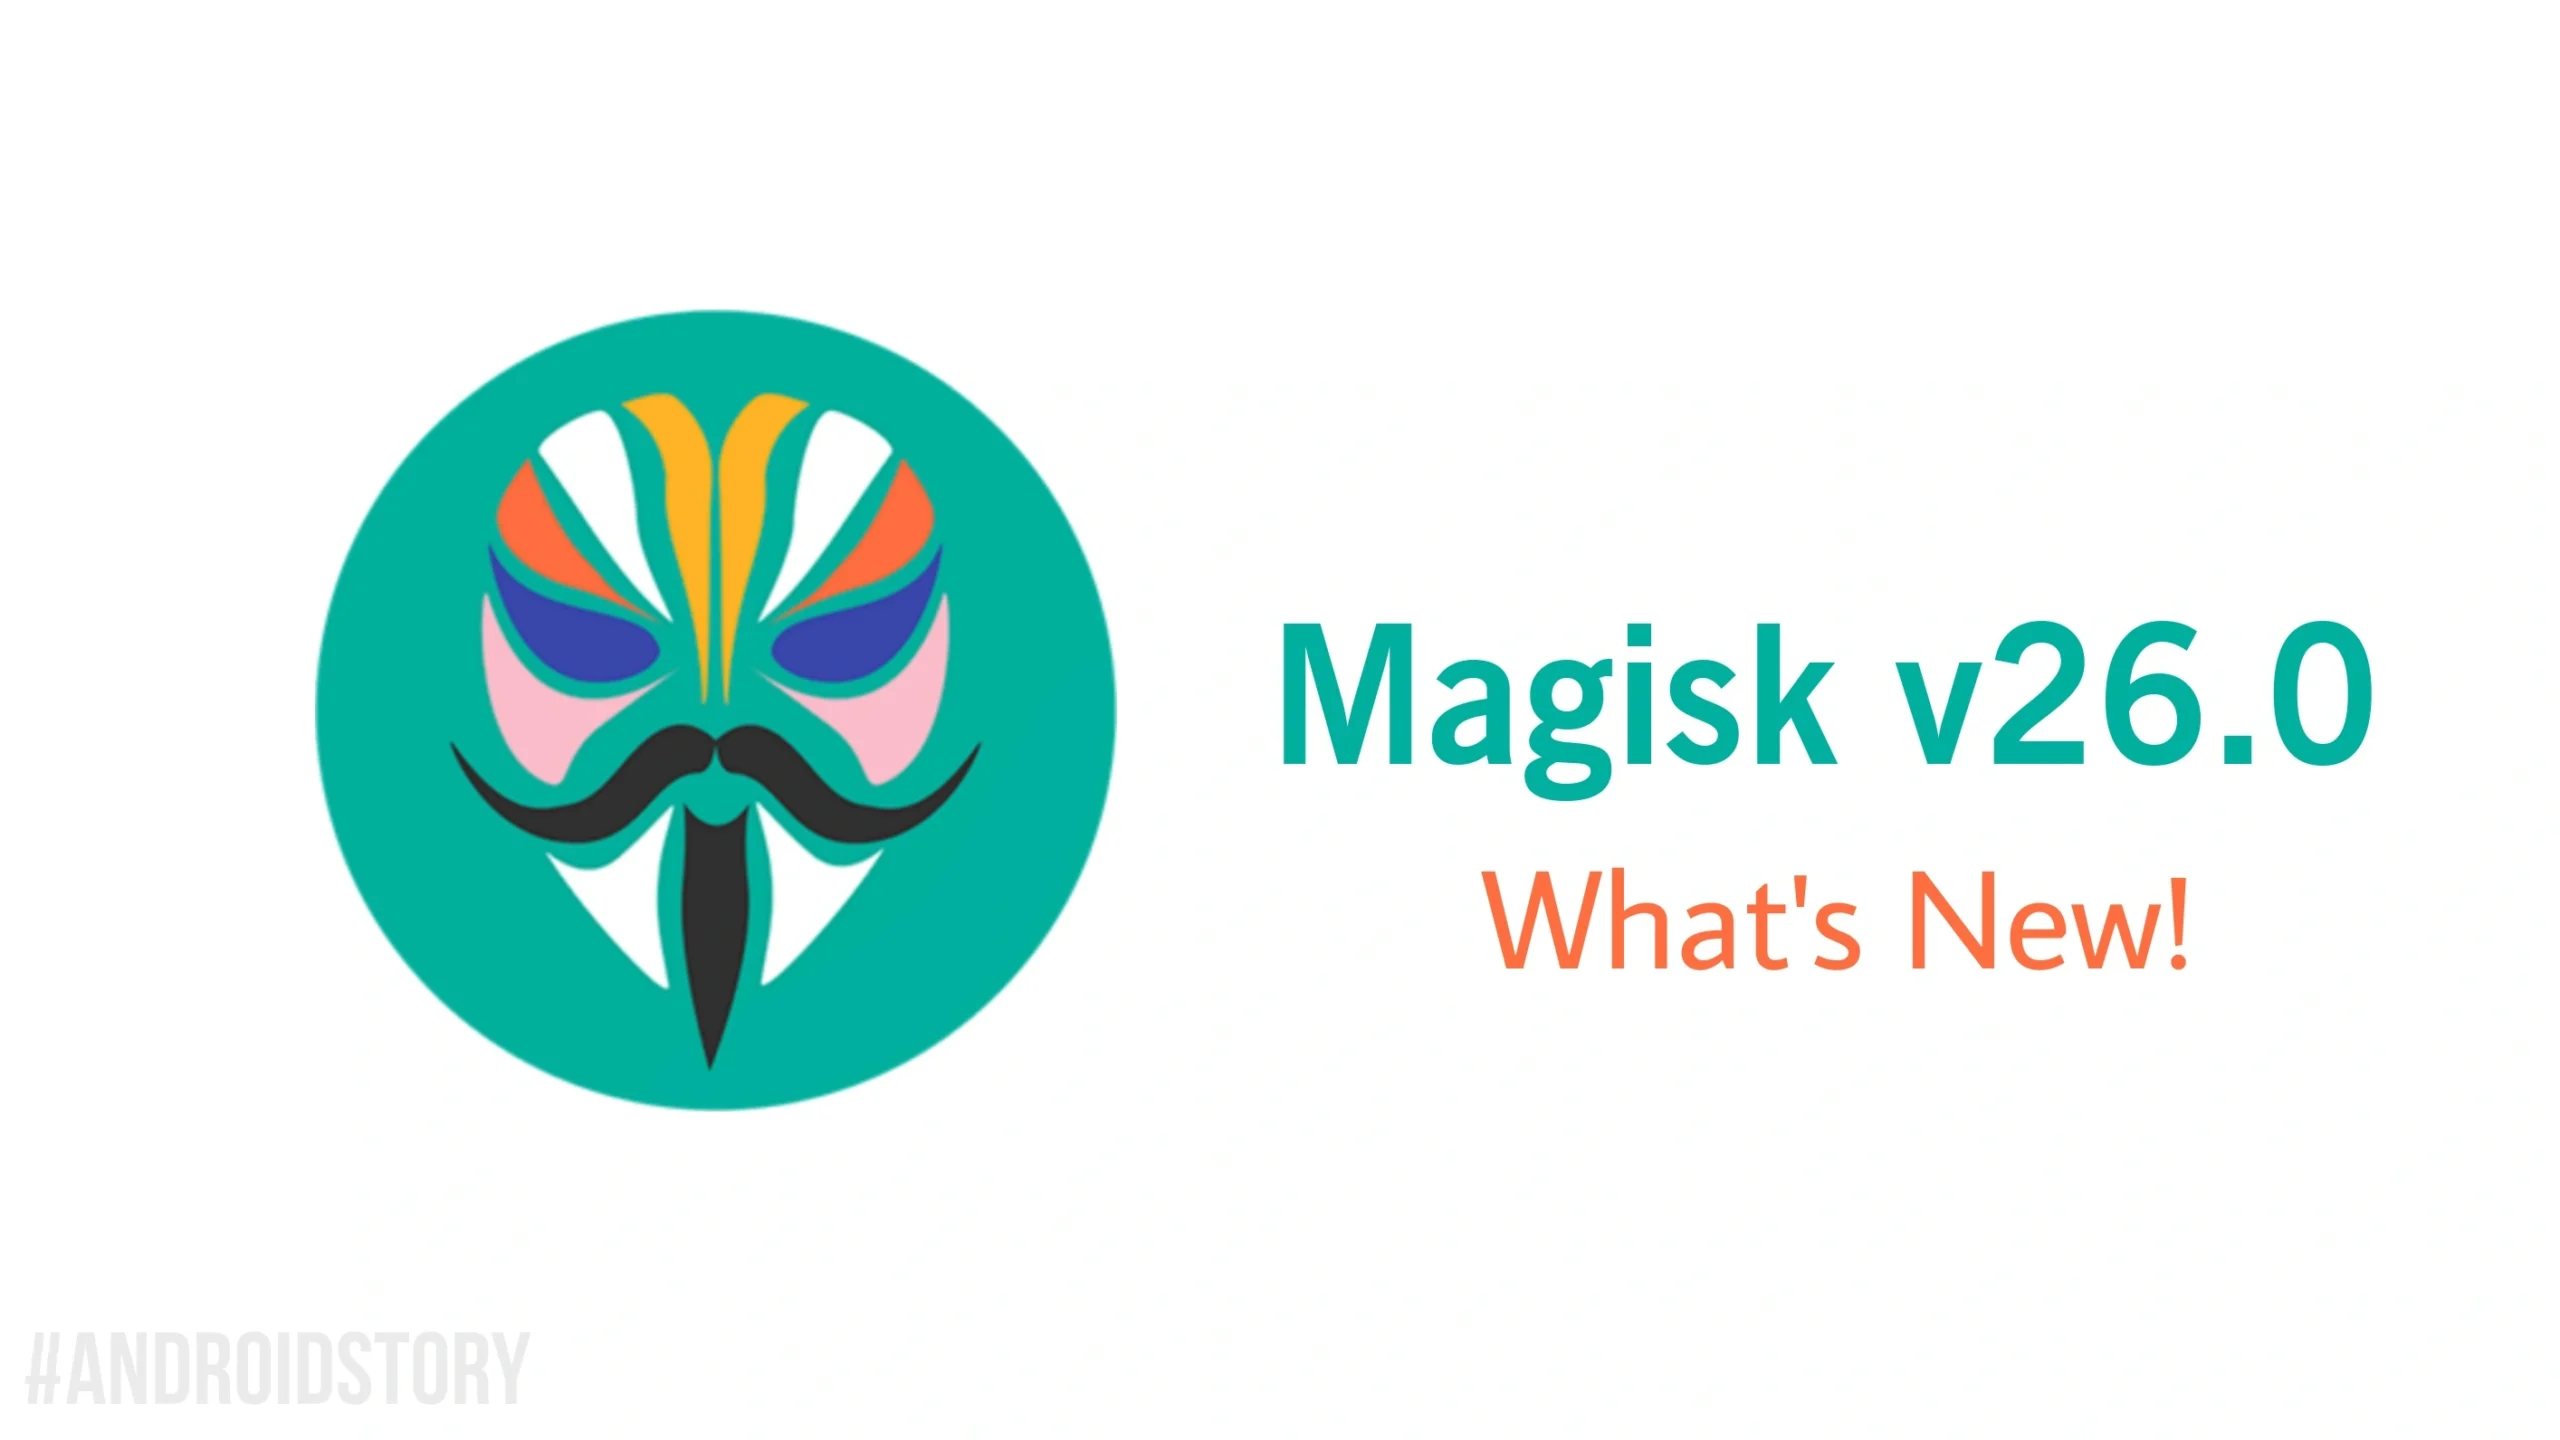 Magisk logo and Magisk v26 text in a white background